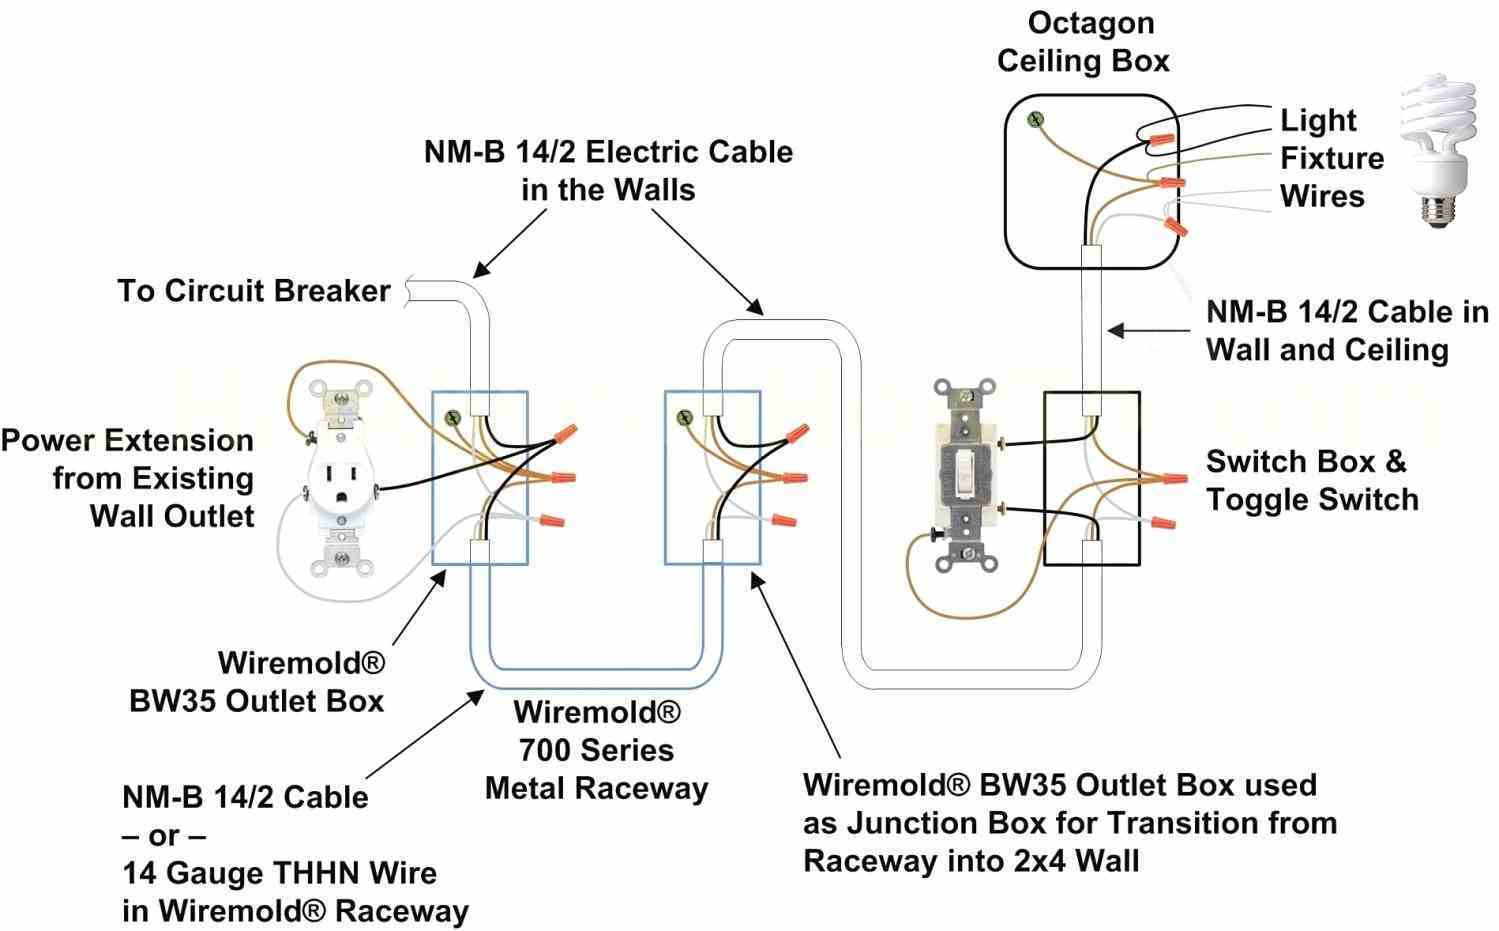 Switch Wiring Outlet Install Diagrams Light From Receptacle Diagram - Wiring A Switched Outlet Wiring Diagram – Power To Receptacle